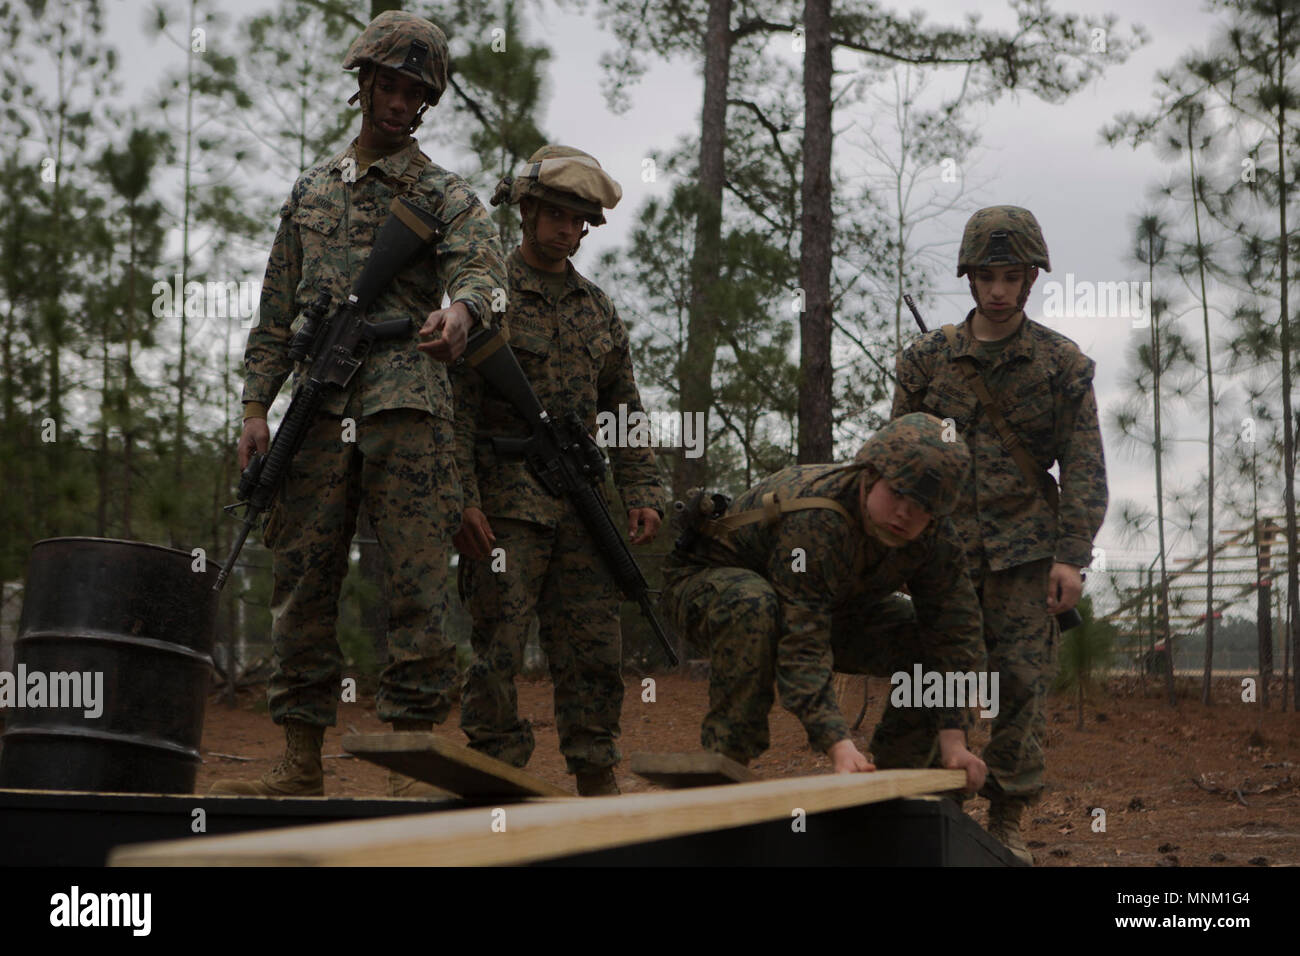 U.S. Marines with Headquarters Battery, 10th Marine Regiment, 2nd Marine Division (2d MARDIV), participate in the Leadership Reaction Course (LRC) as part of exercise Rolling Thunder 1-18 on Ft. Bragg, N.C., Mar. 17, 2018. The purpose of the LRC is to improve and enhance small unit leadership and communication within internal sections. Stock Photo